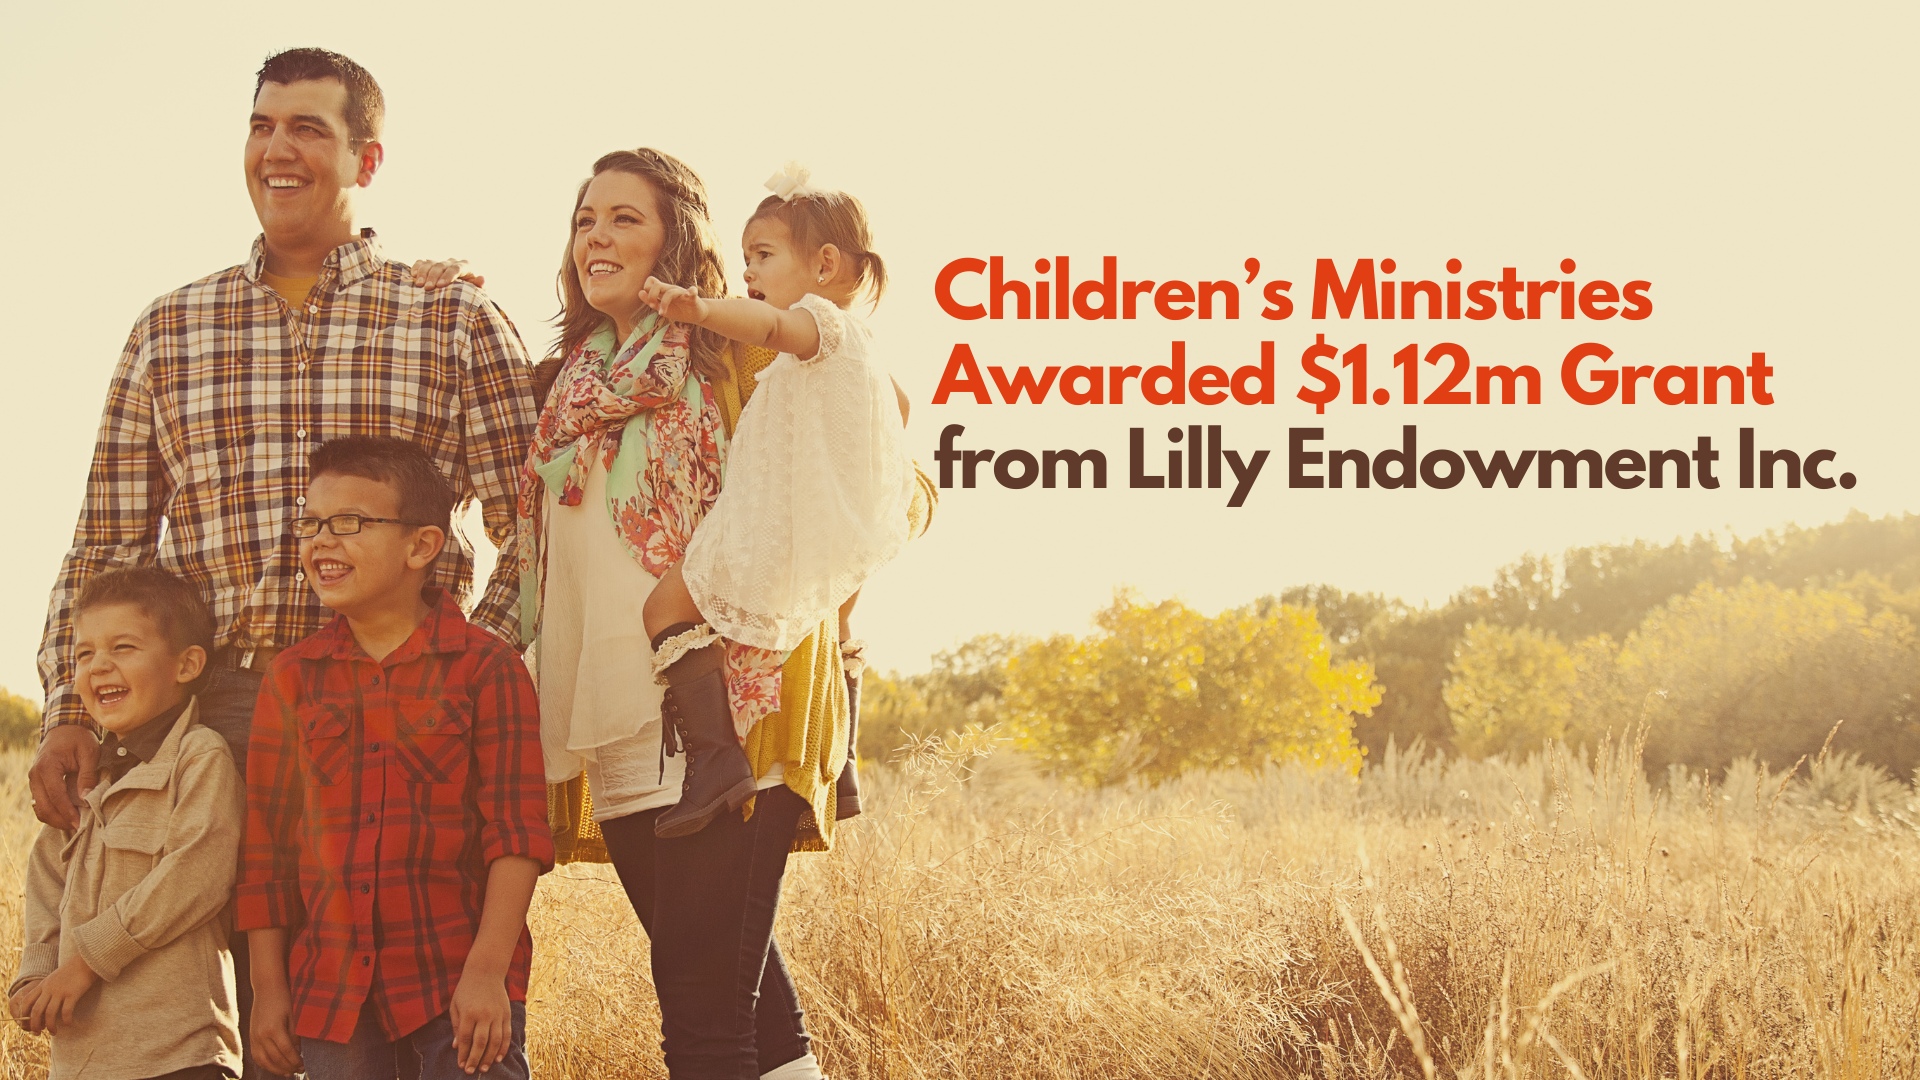 Children’s Ministries Awarded $1.12m Grant from Lilly Endowment Inc.